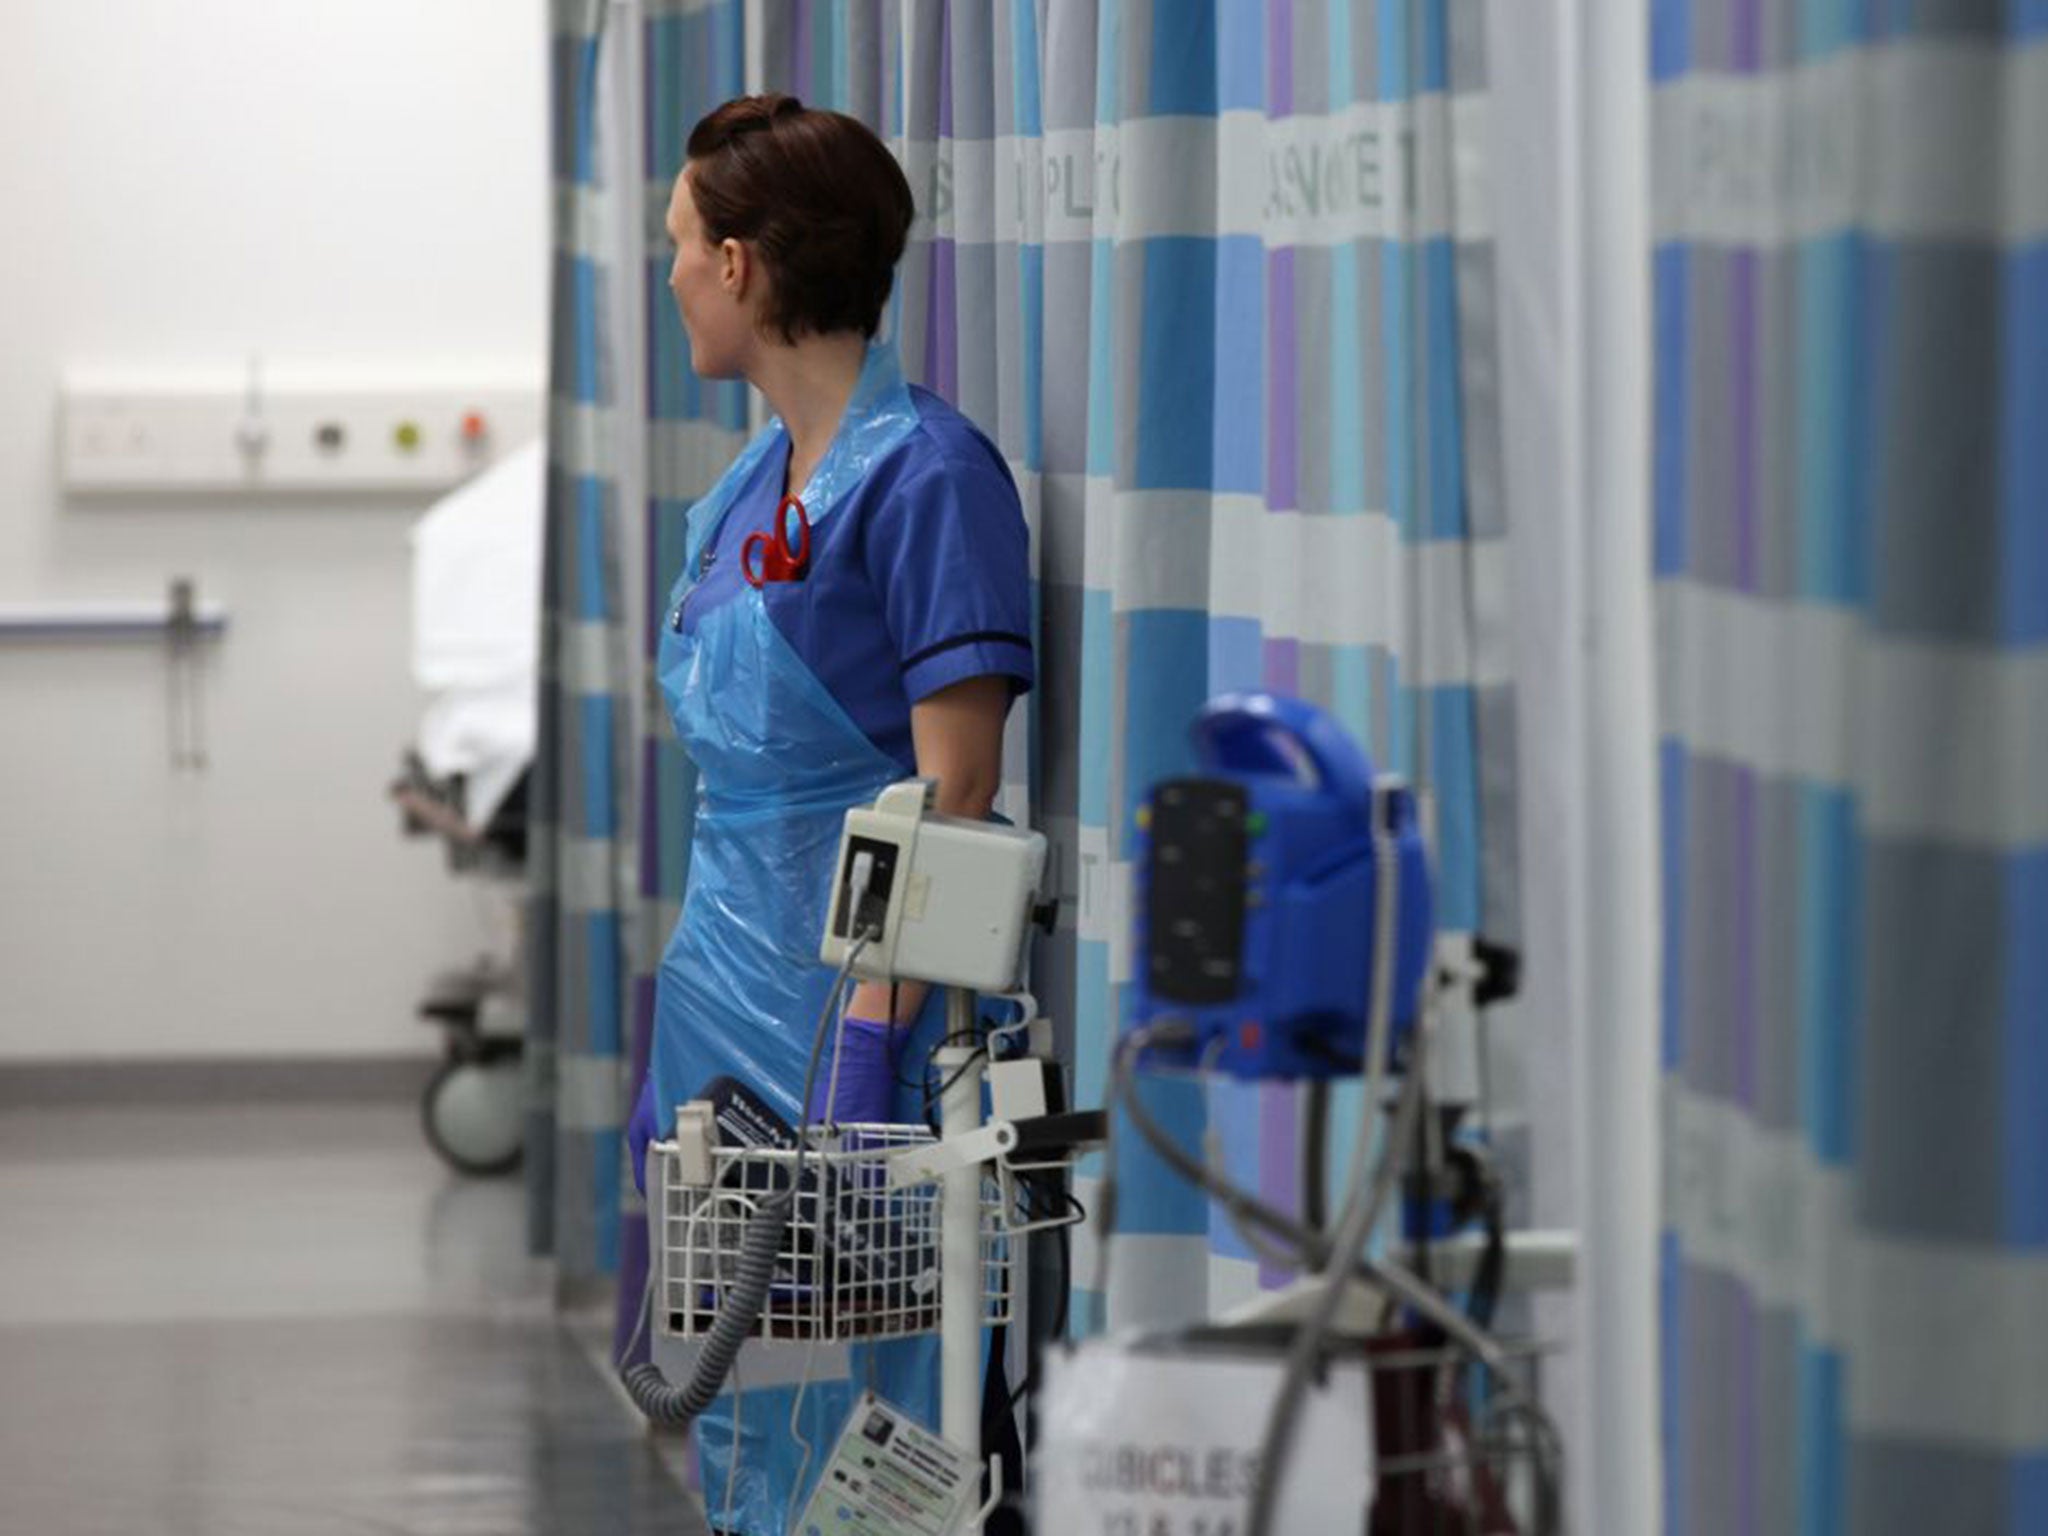 Fears continue to mount about the pressures on the NHS